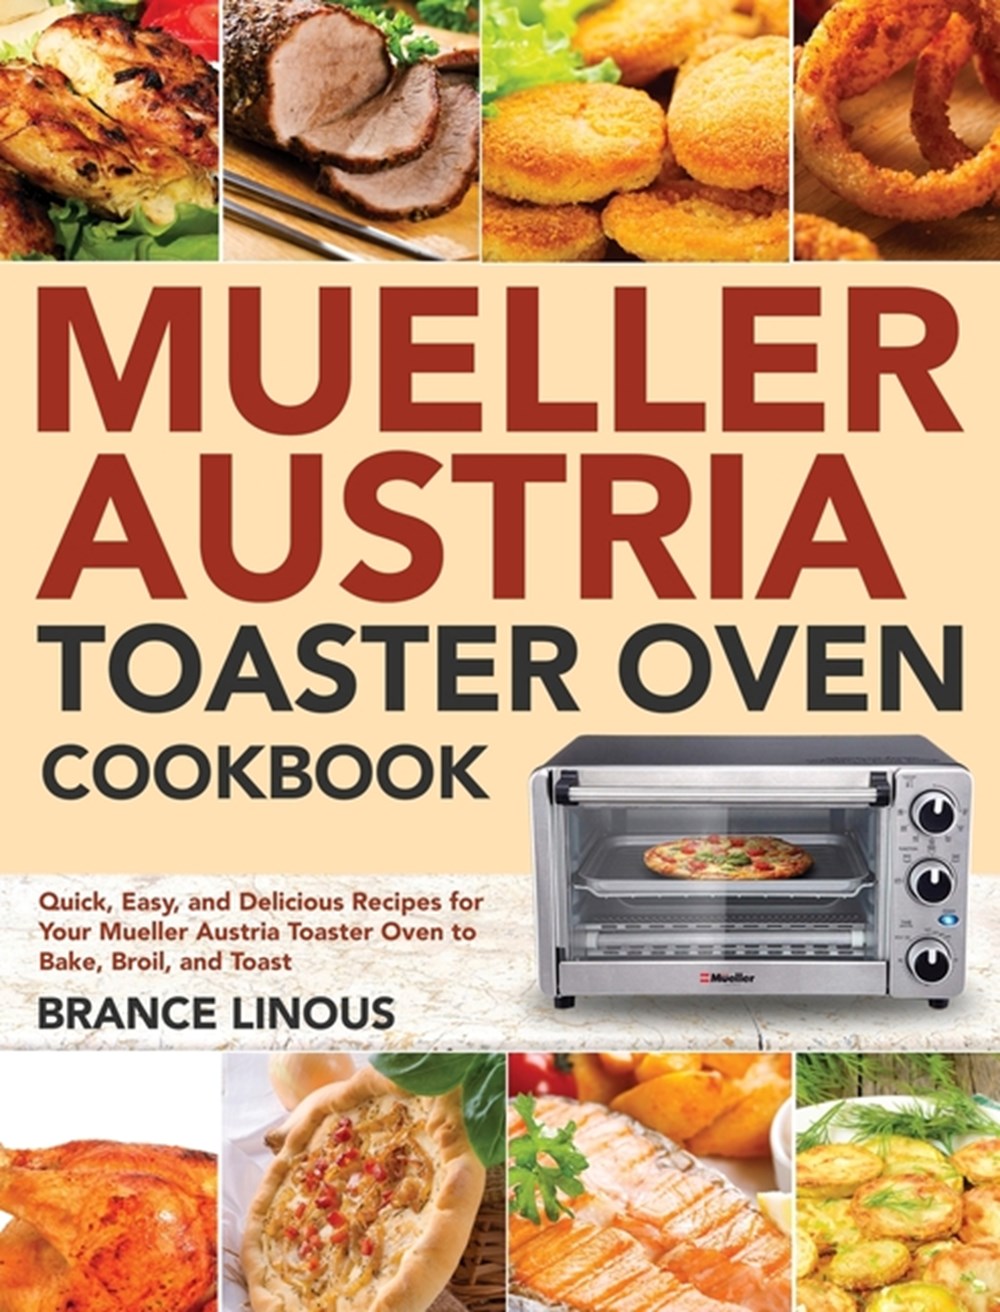 Mueller Austria Toaster Oven Cookbook: Quick, Easy, and Delicious Recipes  for Your Mueller Austria Toaster Oven to Bake, Broil, and Toast by Brance  Linous